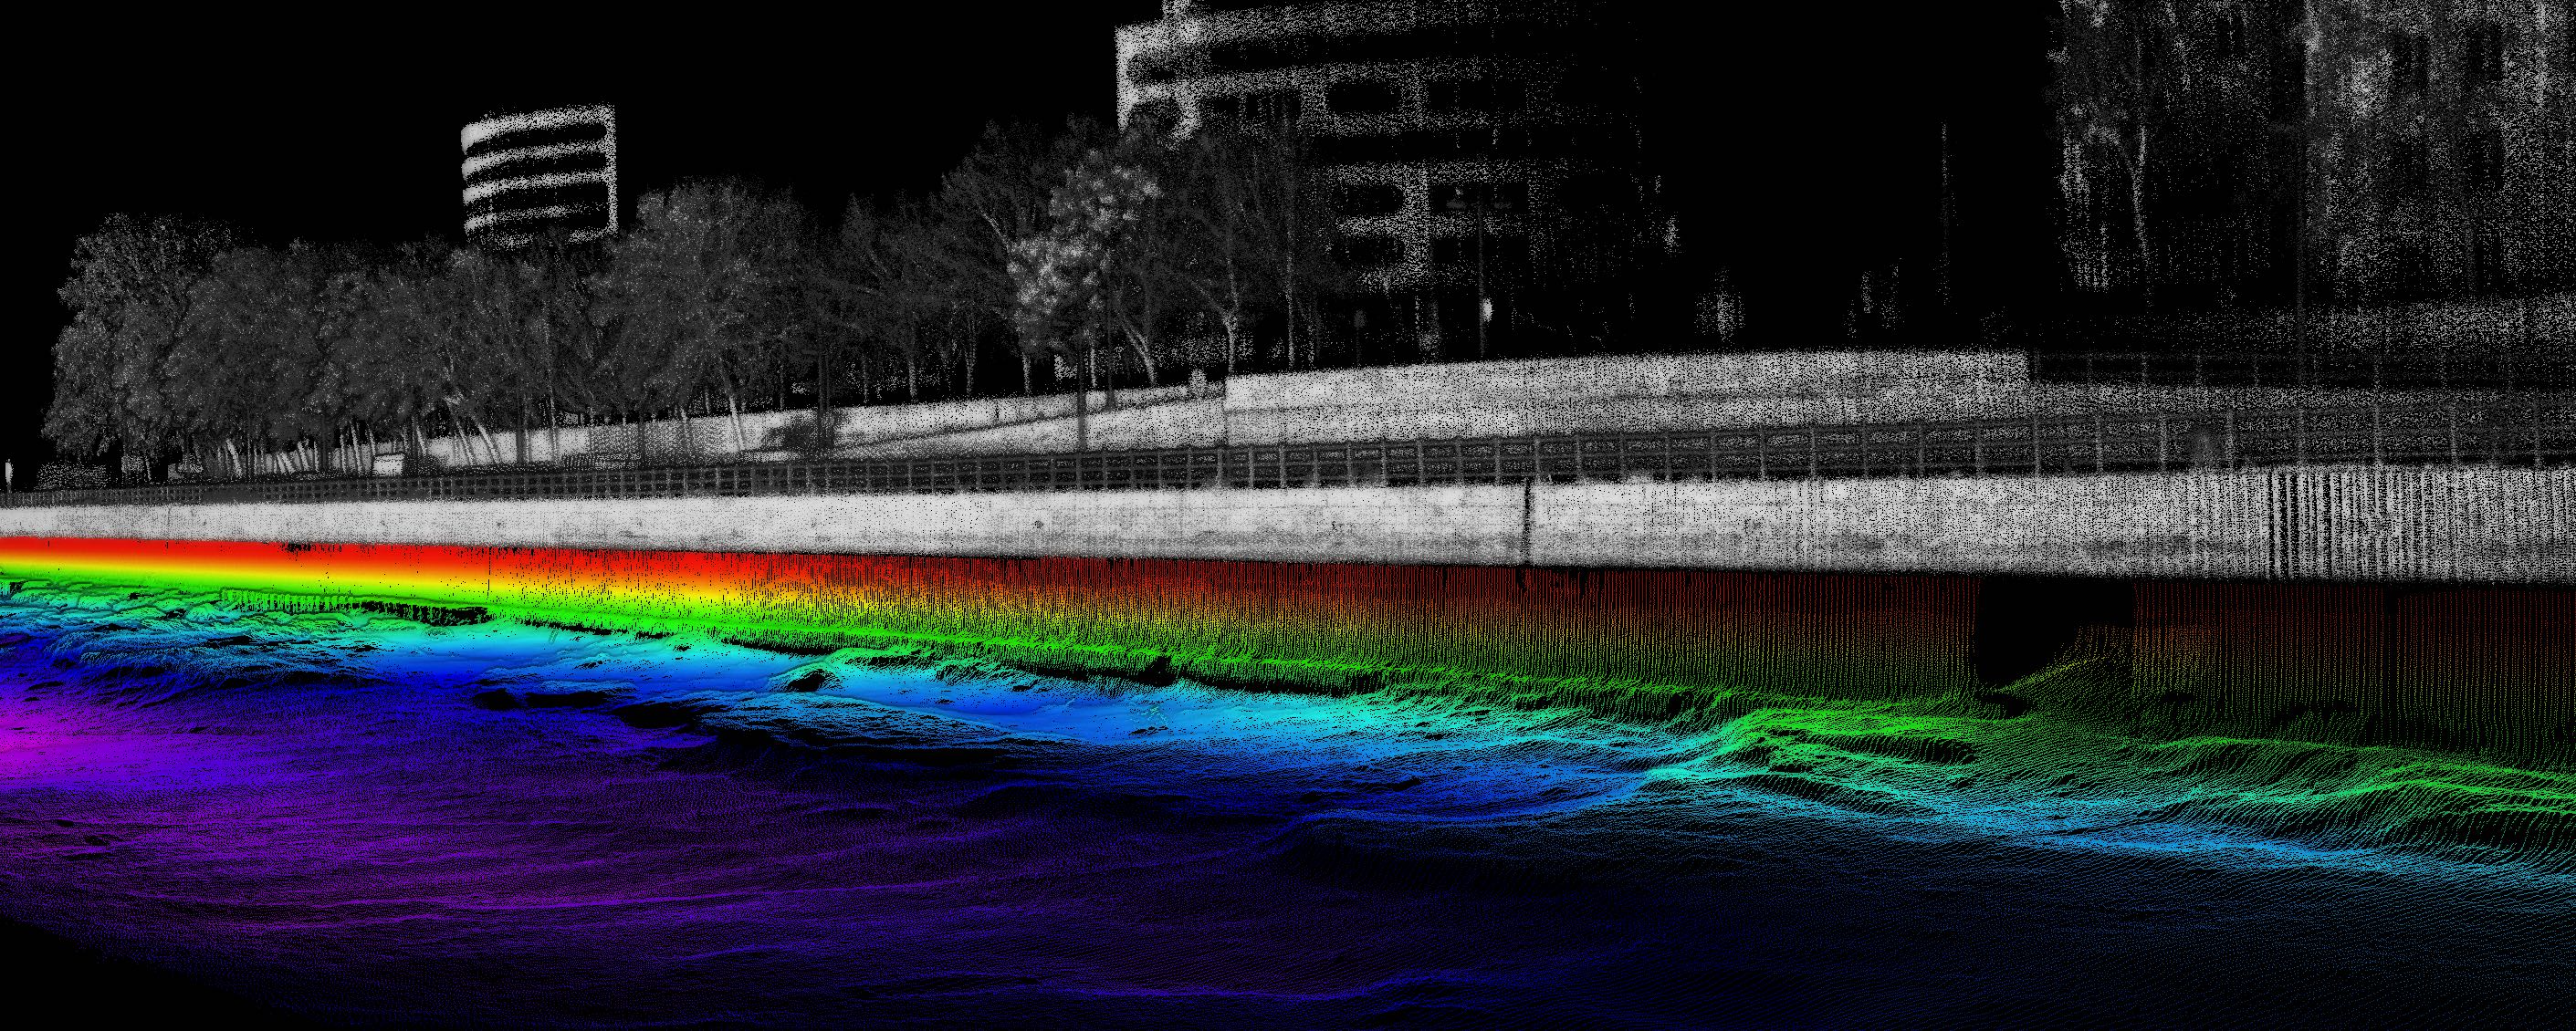 Bathymetry and Backscatter Data Survey in Paris Using Multibeam Echosounder and Lidar System seine river walls point cloud